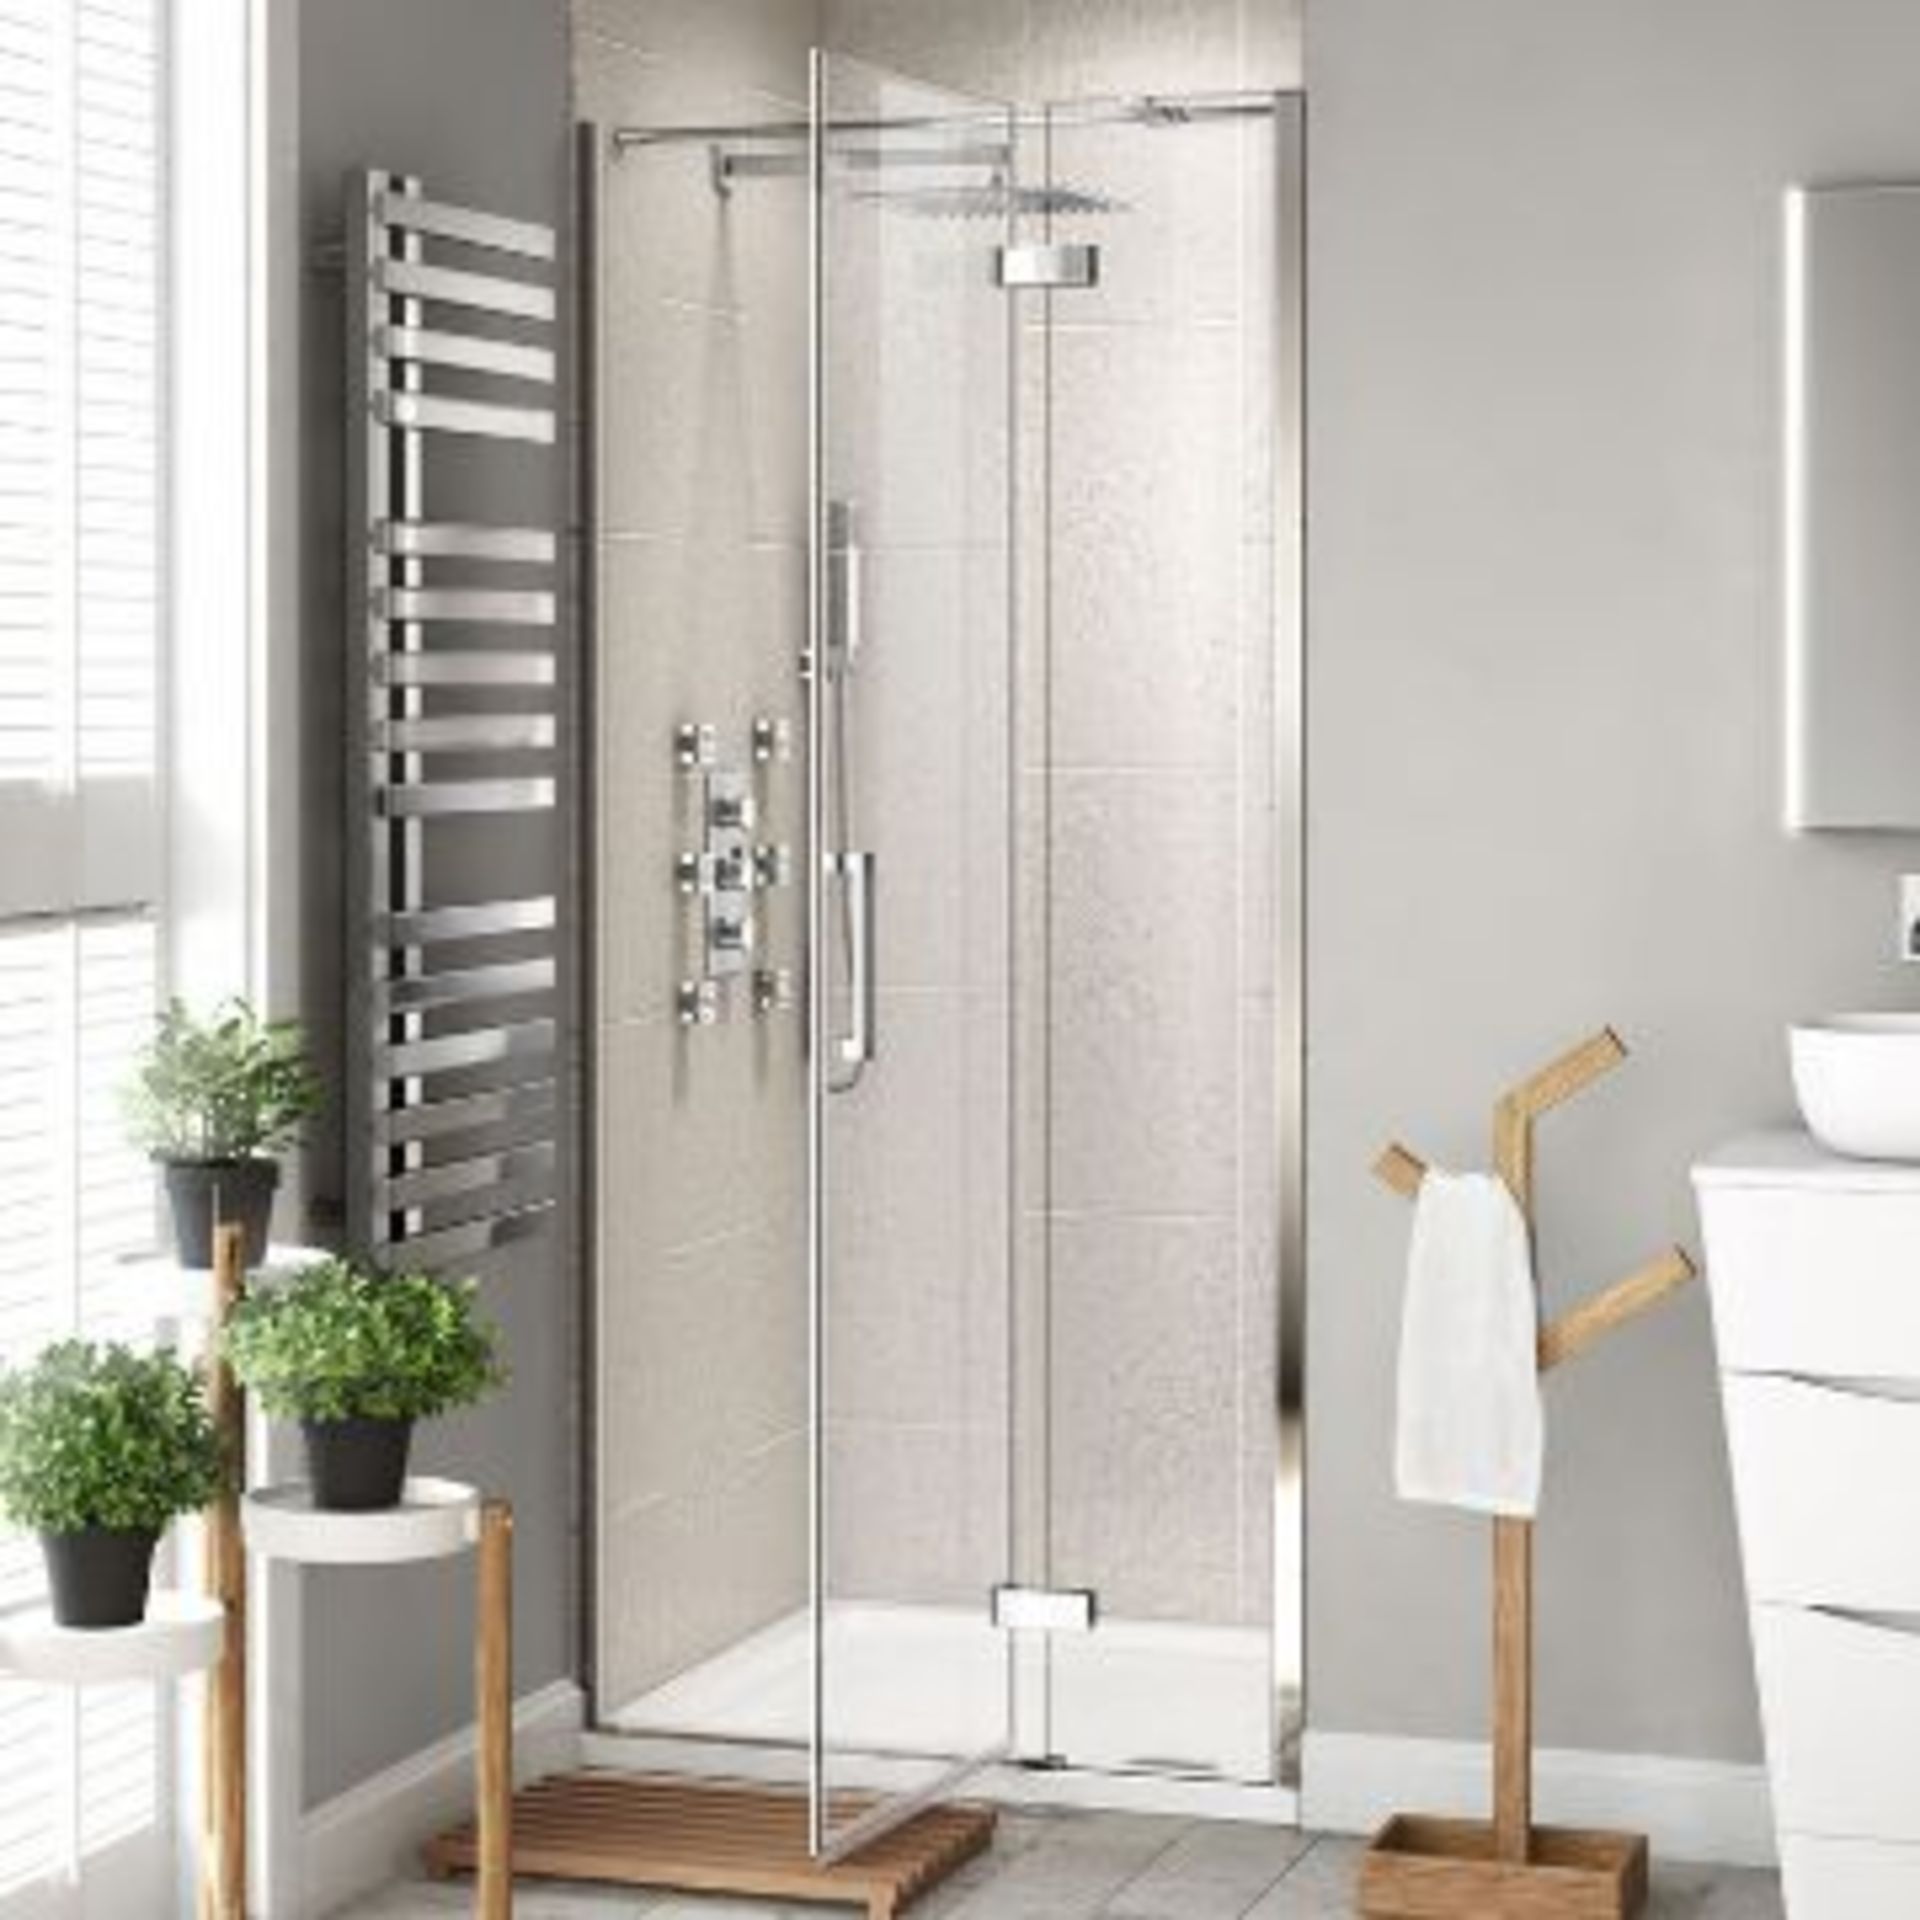 New & Boxed 700mm - 8mm - Premium Easy clean Hinged Shower Door. RRP £499.99.H82600Cp. 8mm Eas...